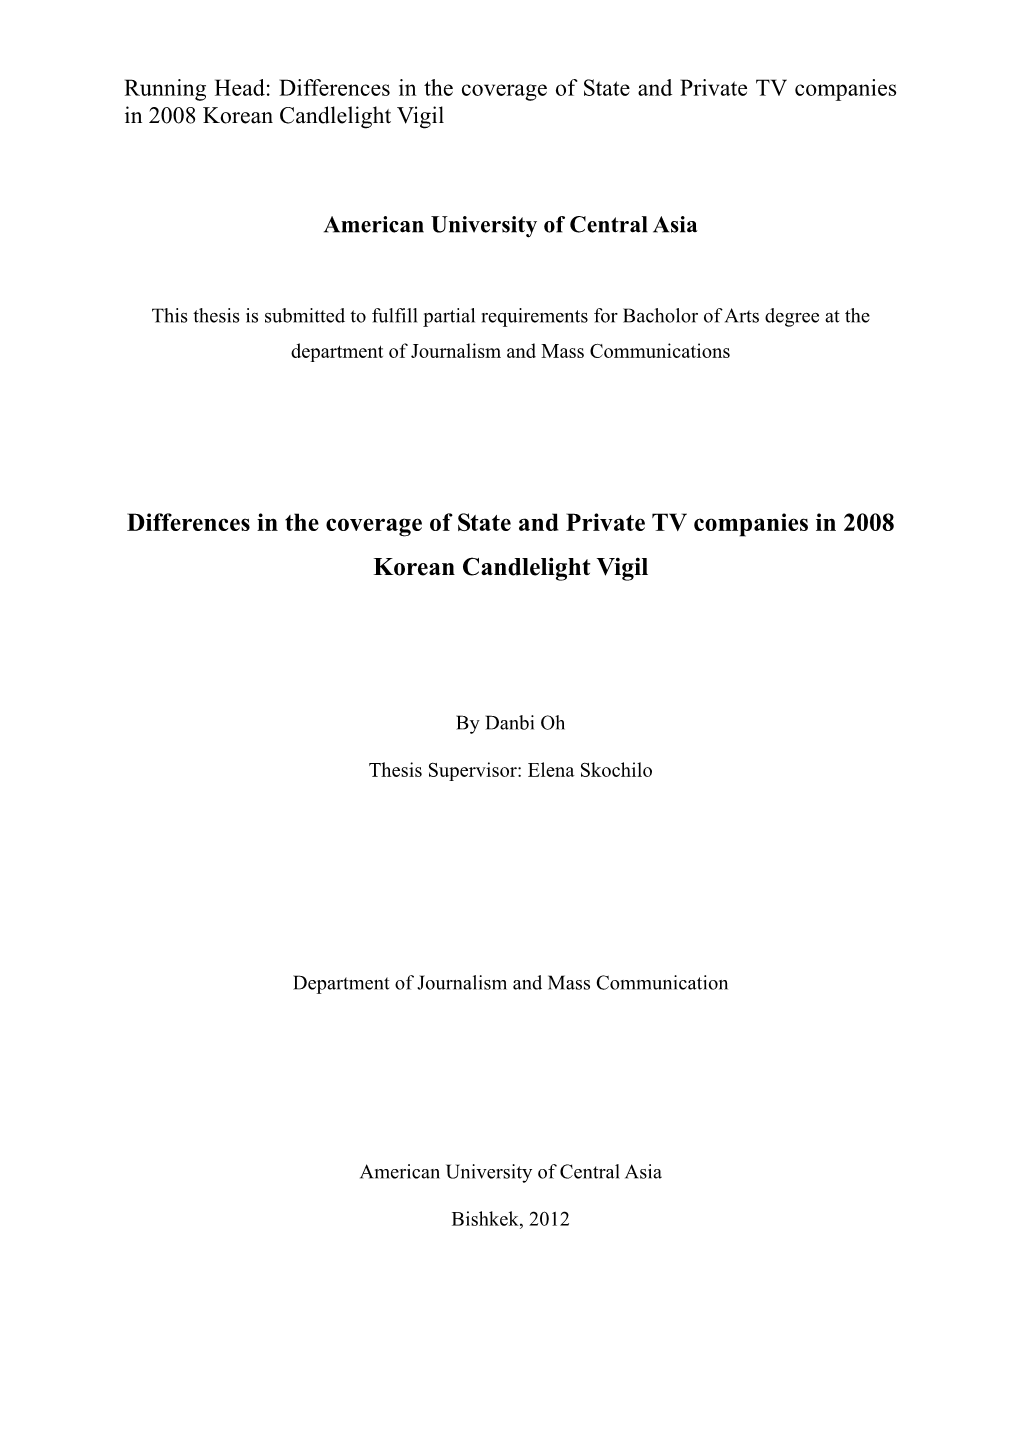 Differences in the Coverage of State and Private TV Companies in 2008 Korean Candlelight Vigil